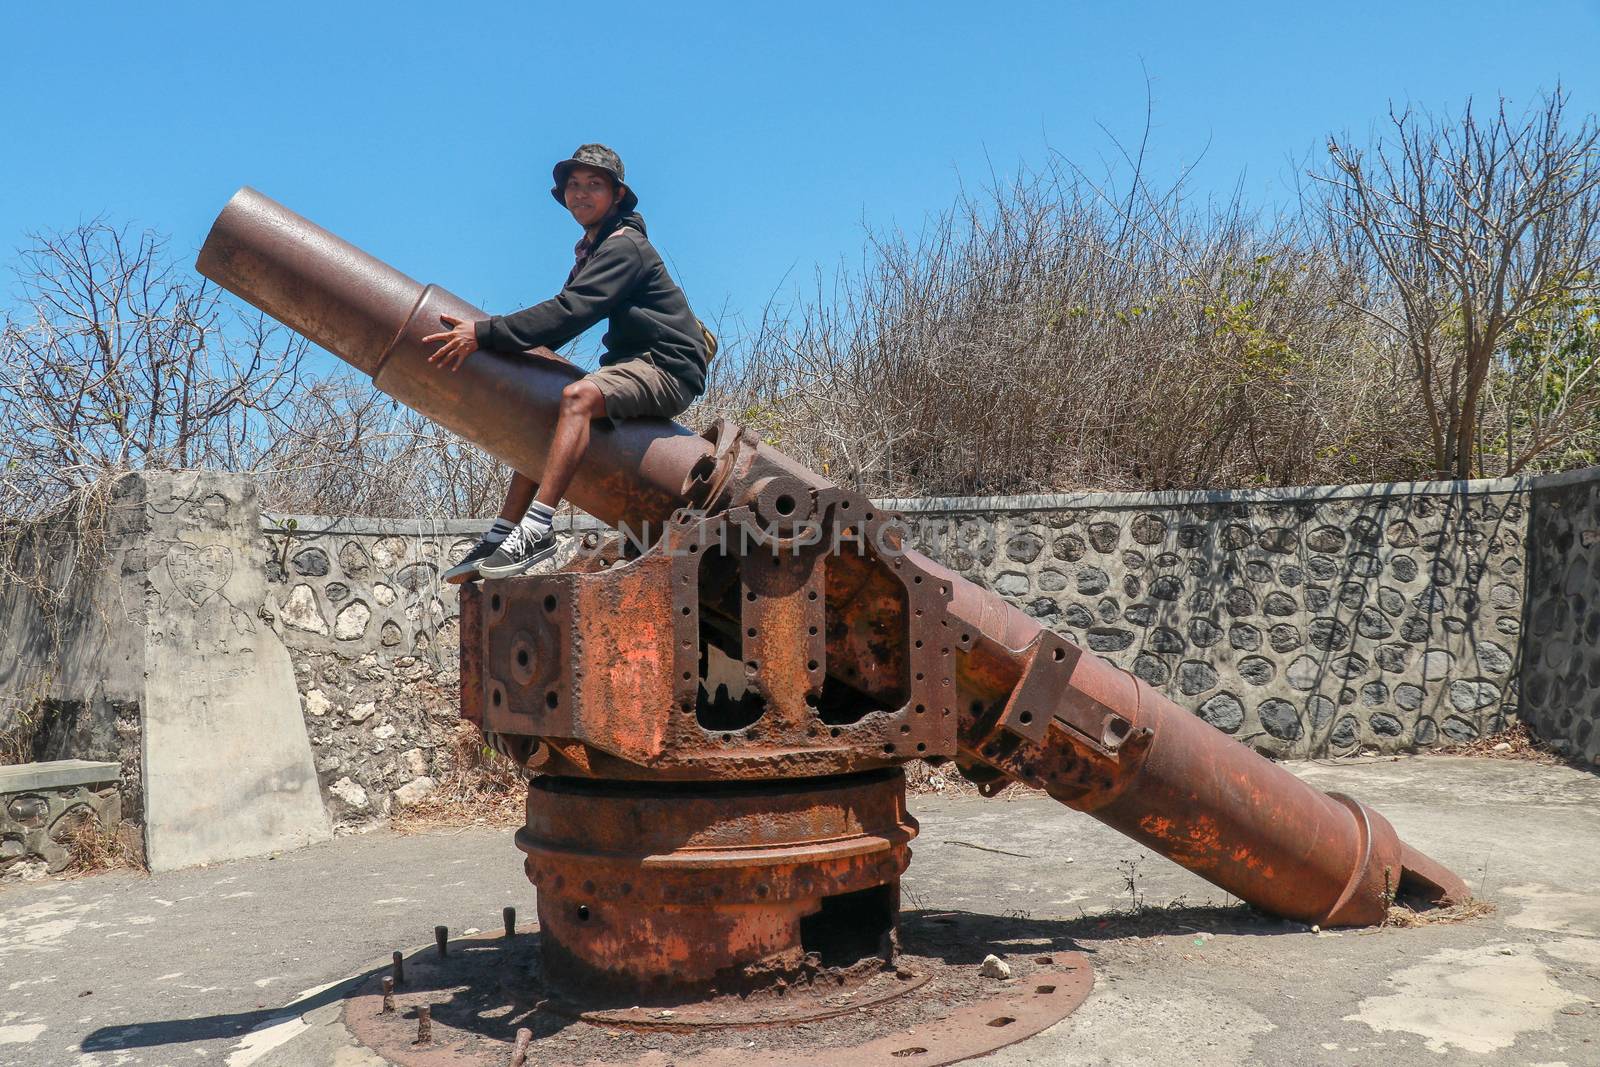 An Asian teenager sits on a historic World War II cannon. Military stone fortifications from World War II. A young guy sitting on an ancient cannon. Lombok, Indonesia by Sanatana2008